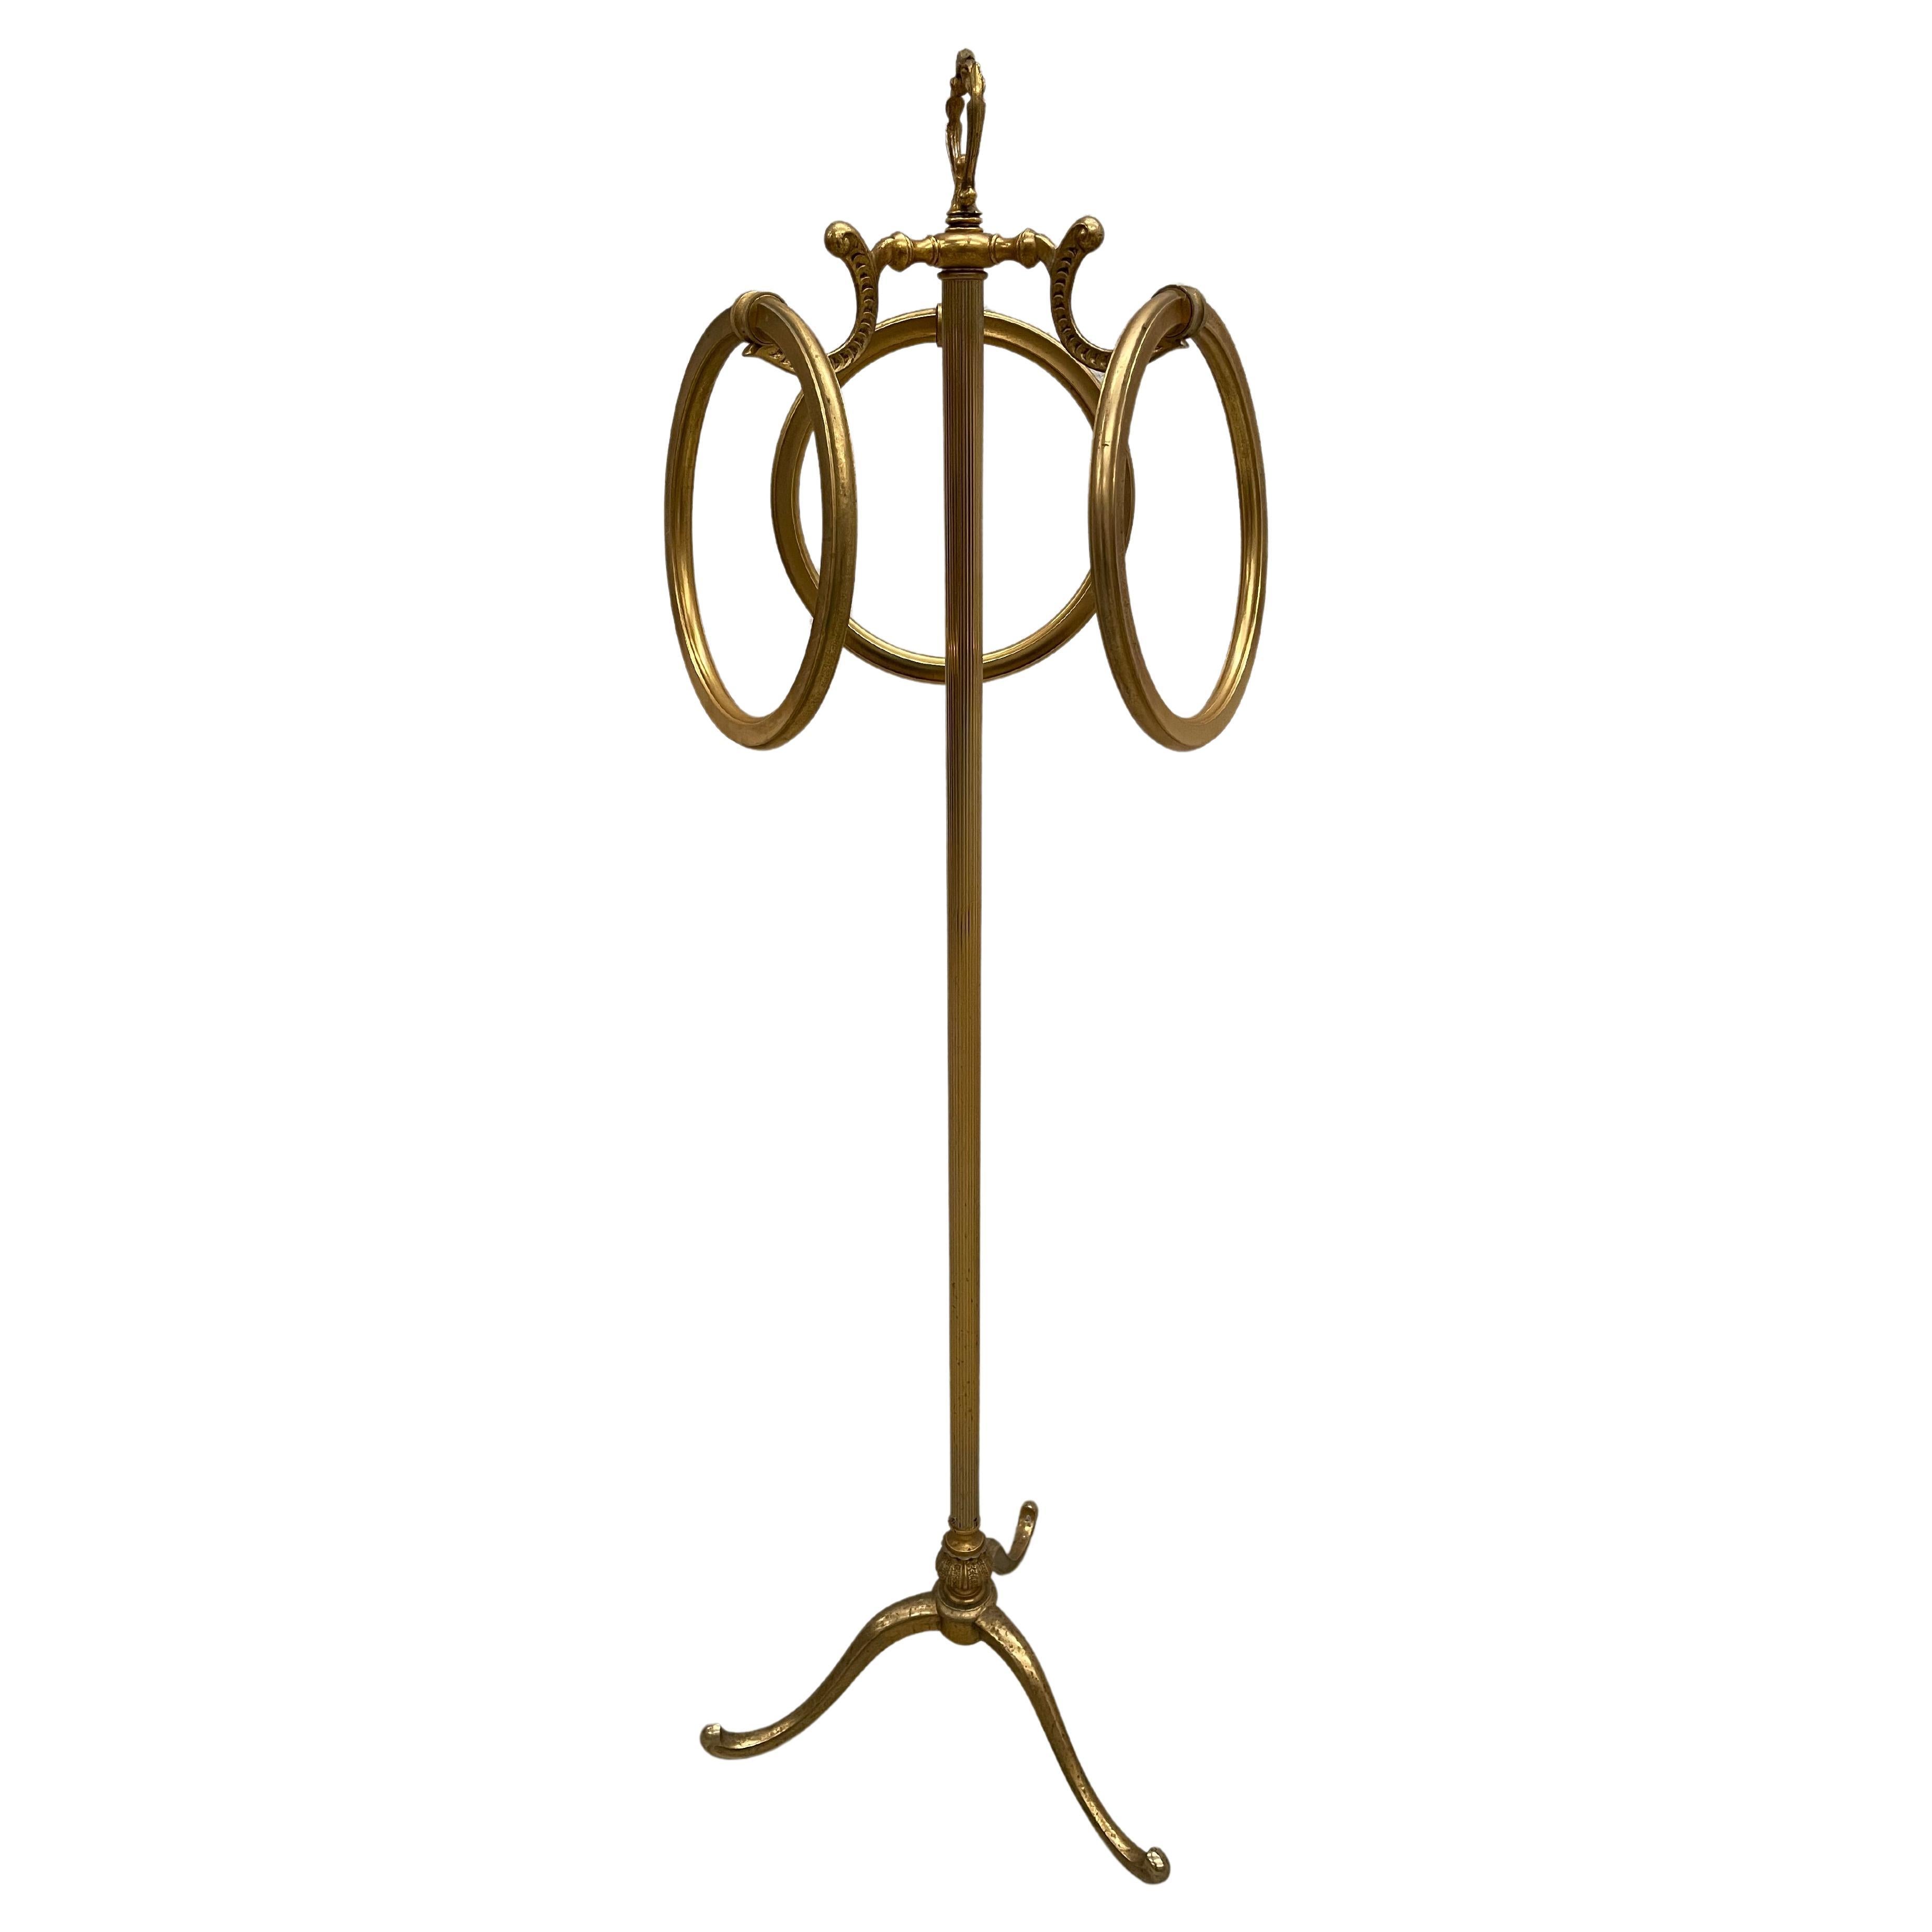 Exclusive gold-plated brass floor towel rack For Sale